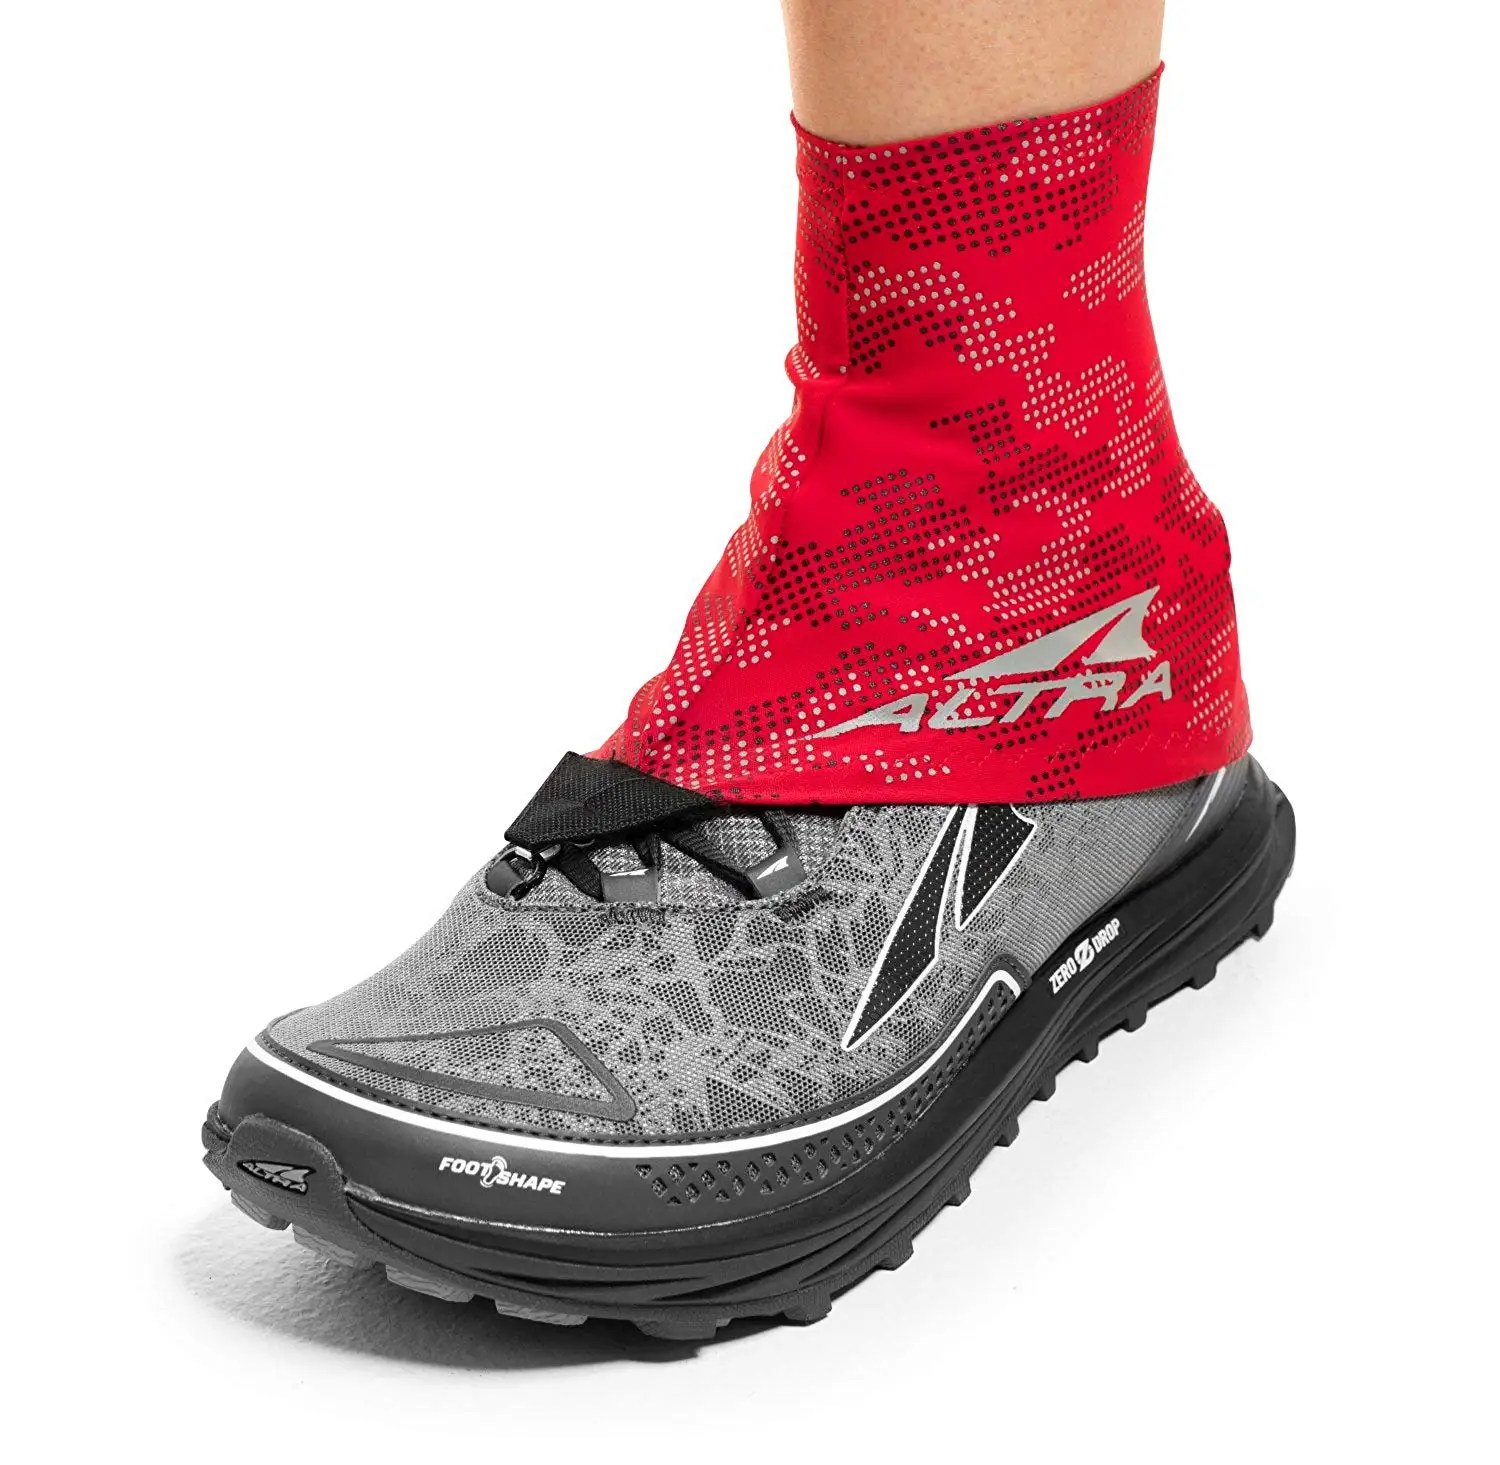 altra trail gaiter protective shoe covers